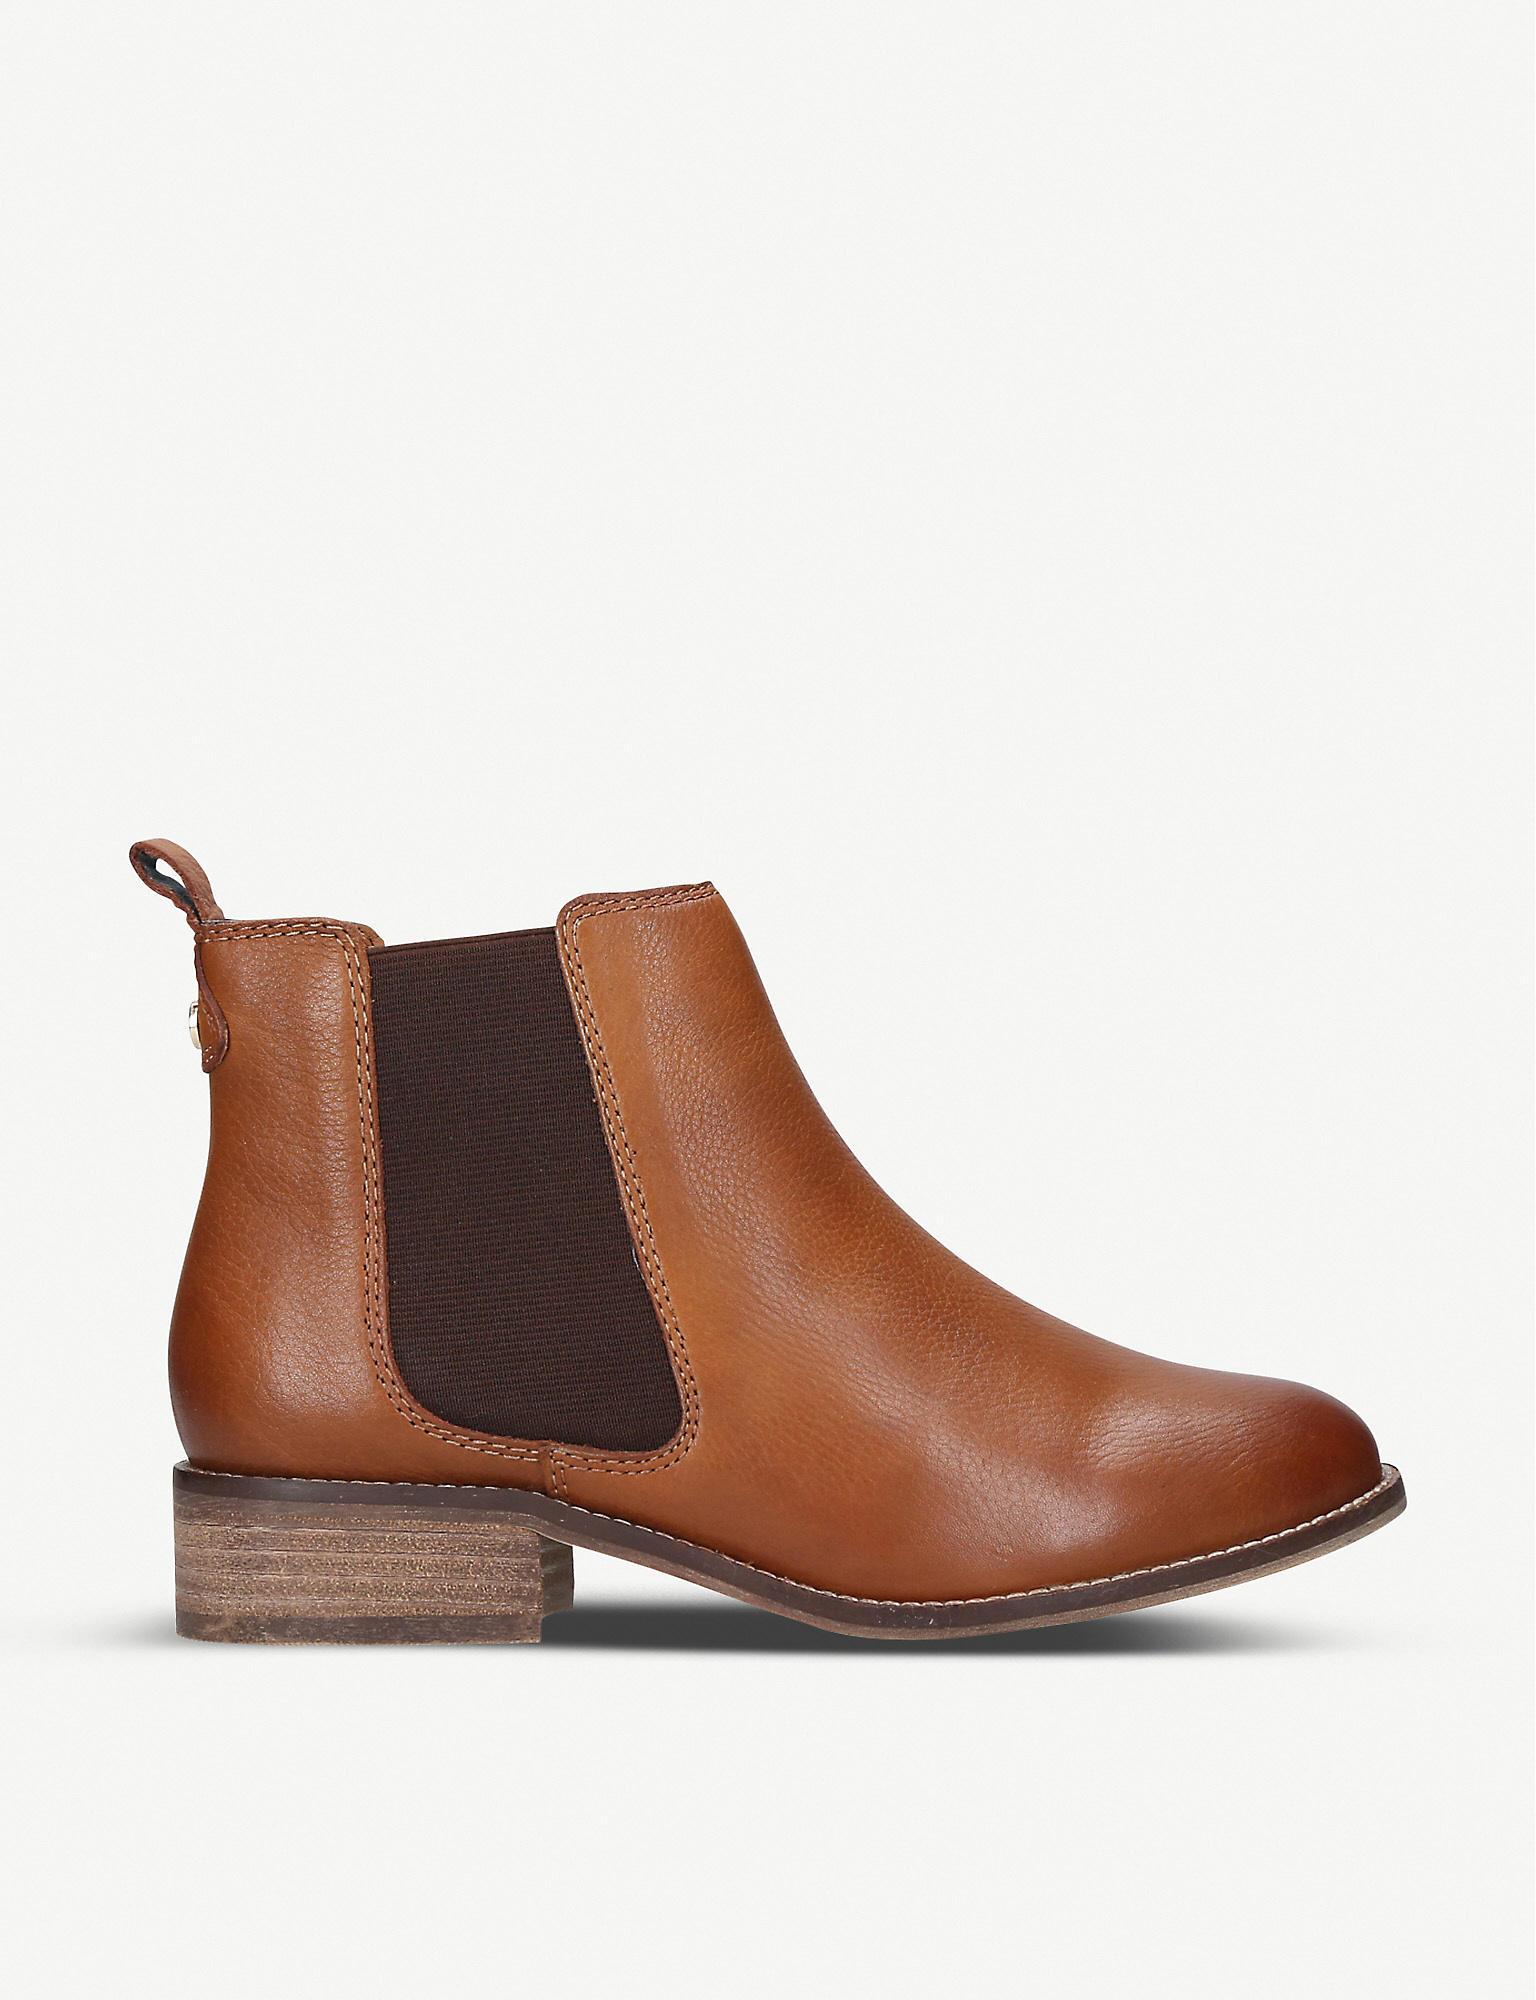 storm' Flat Chelsea Boots in Tan (Brown 